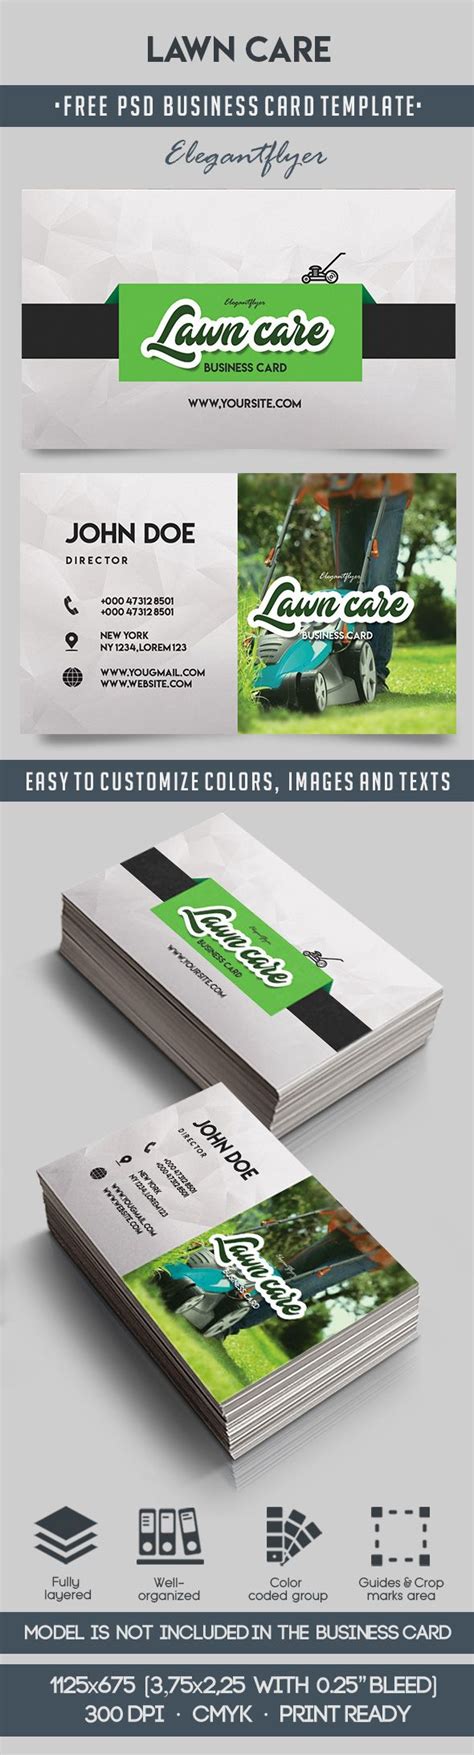 Without any design skills whatsoever, you. Lawn Care - Free Business Card Templates PSD - by ElegantFlyer